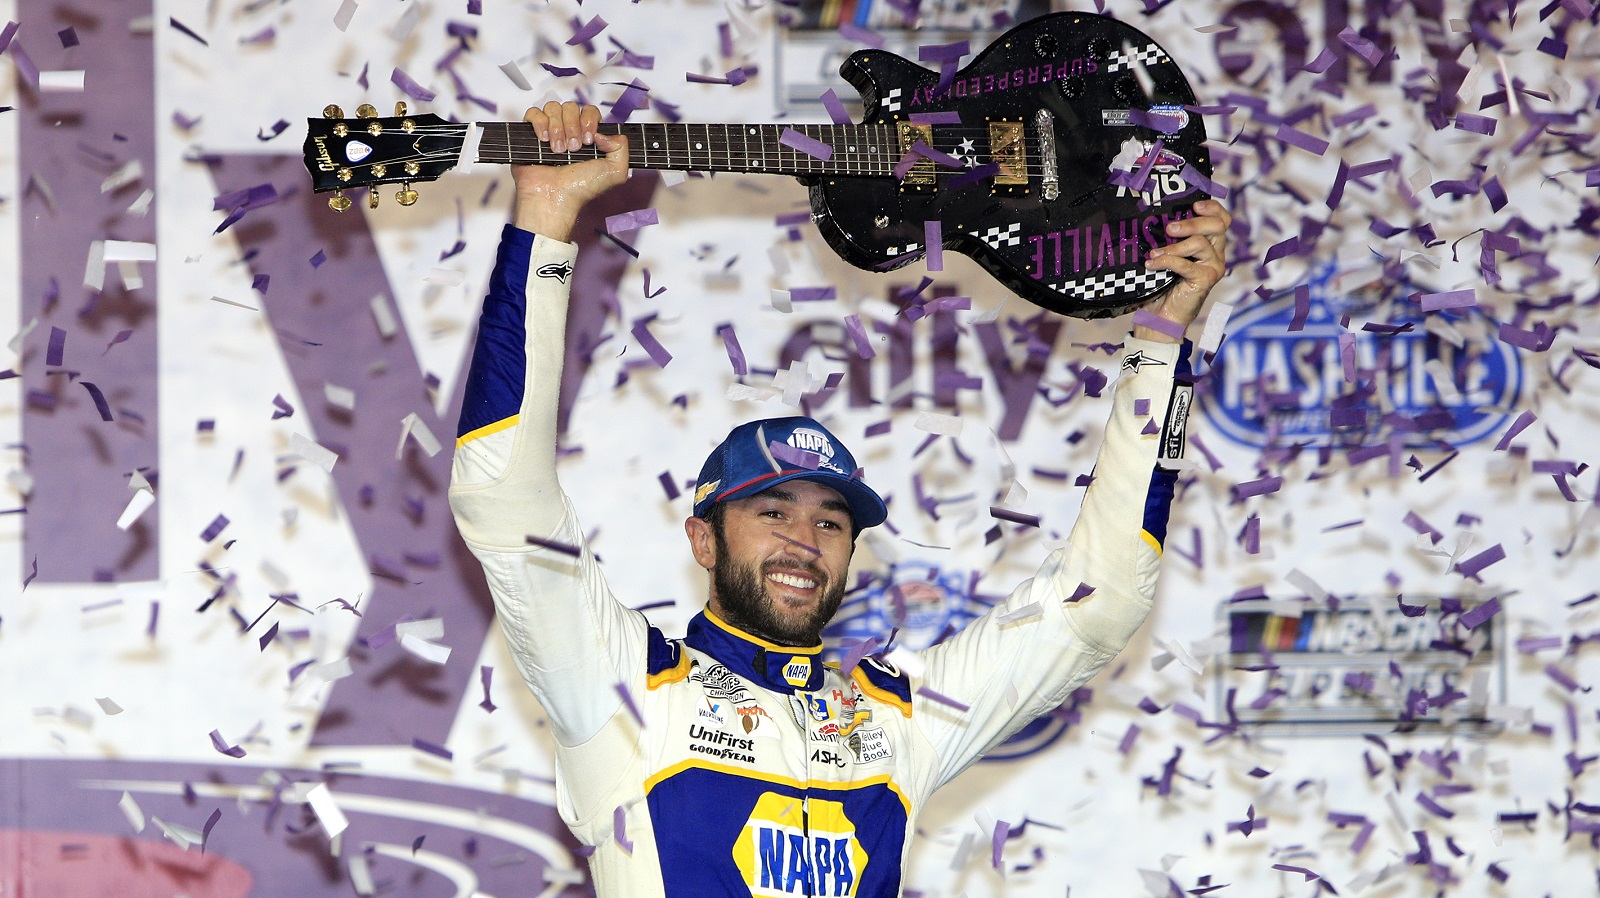 Chase Elliott celebrates after winning the NASCAR Cup Series Ally 400 on June 26, 2022.